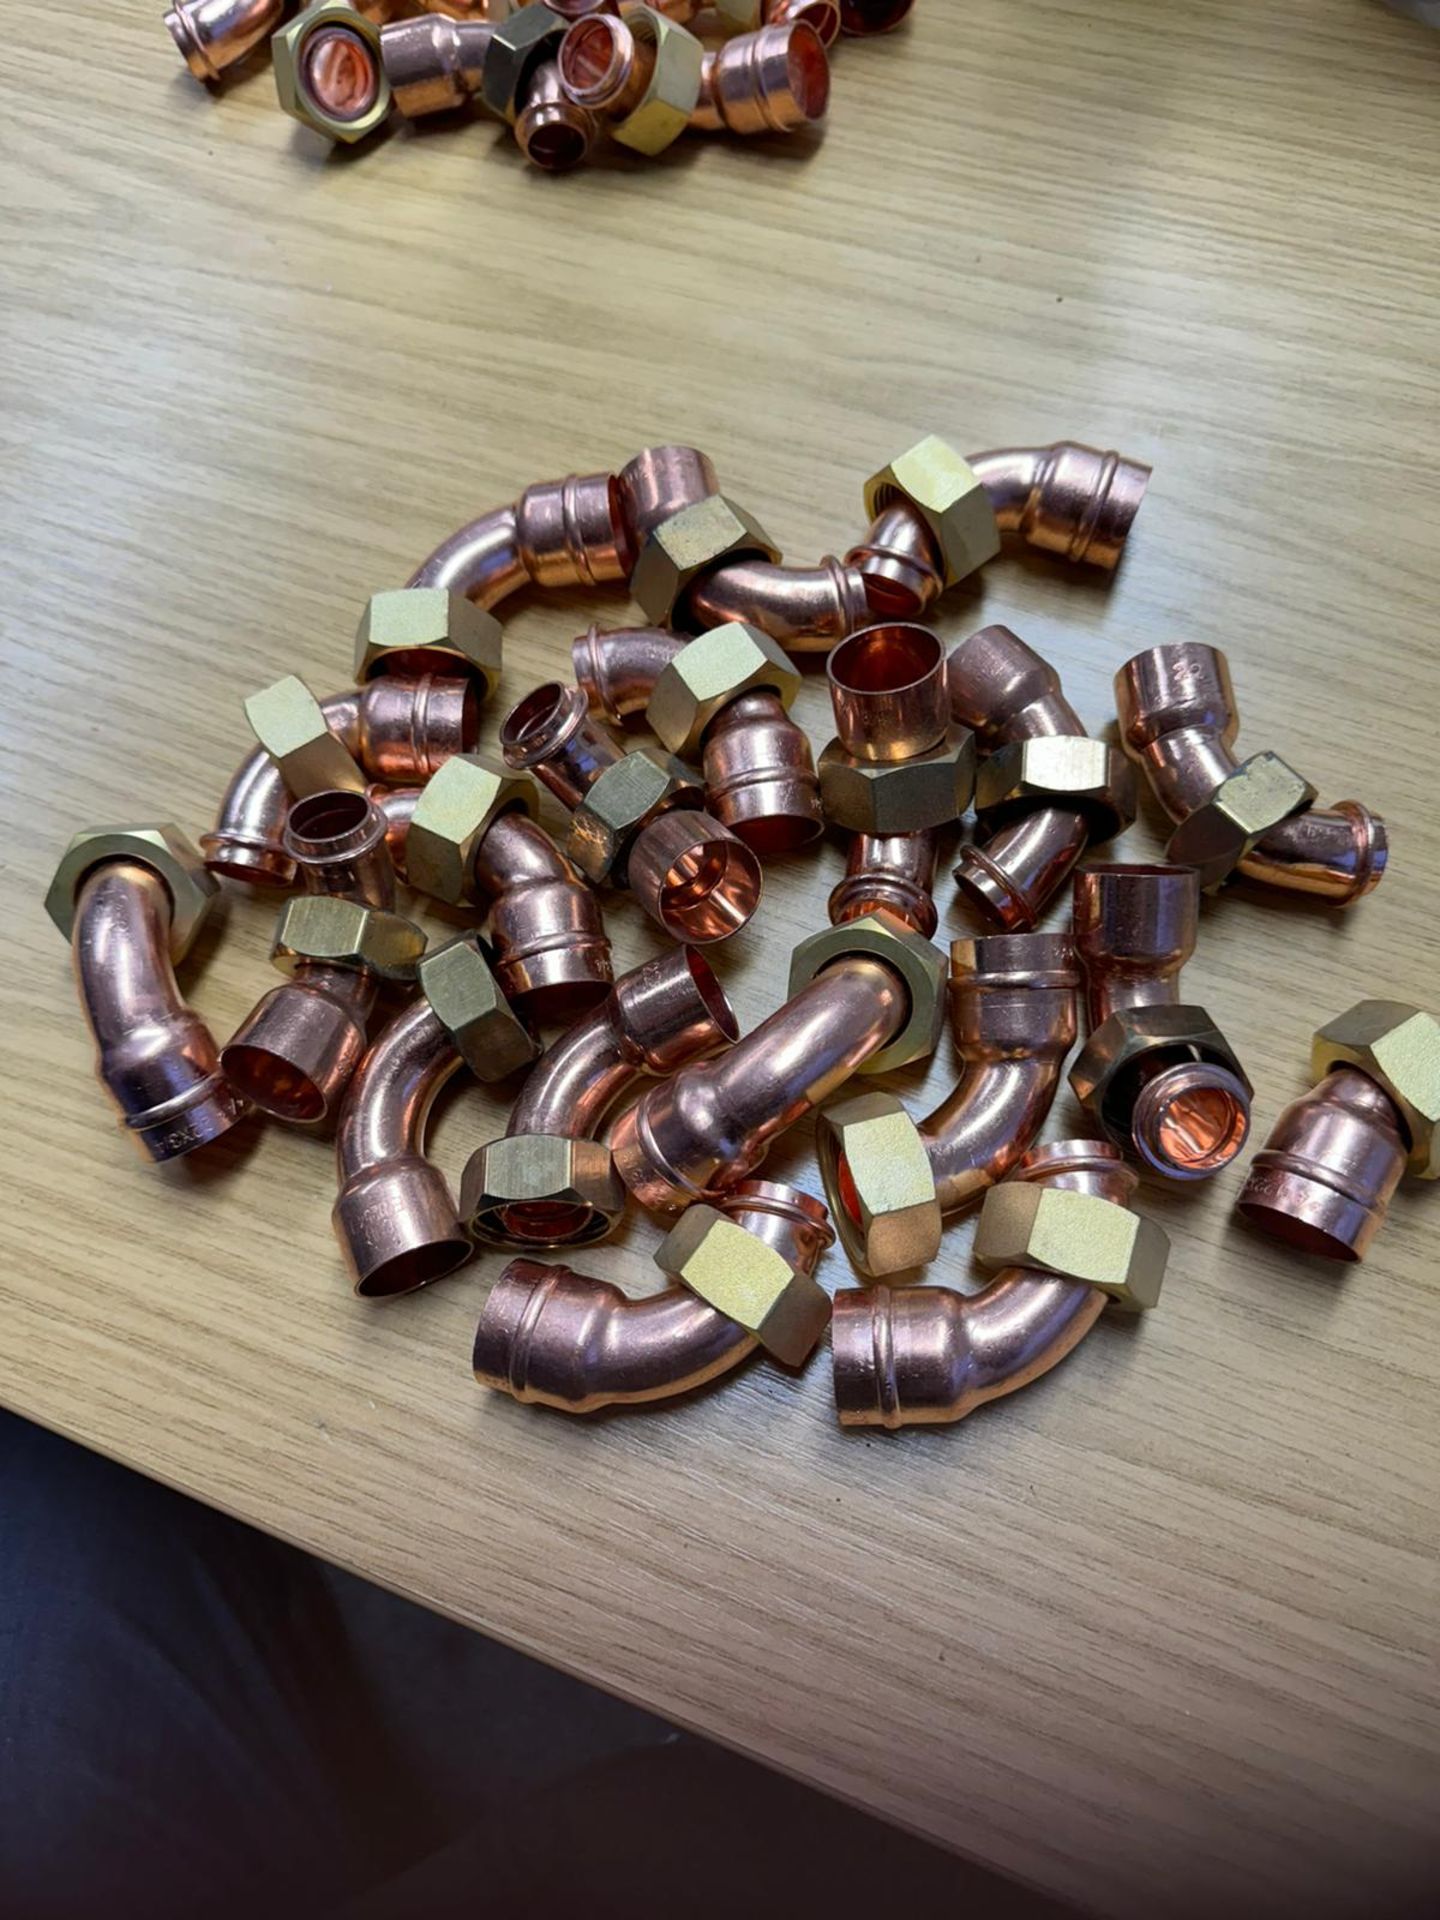 30 fittings - 22mm x 3/4” bent connectors - Image 2 of 2